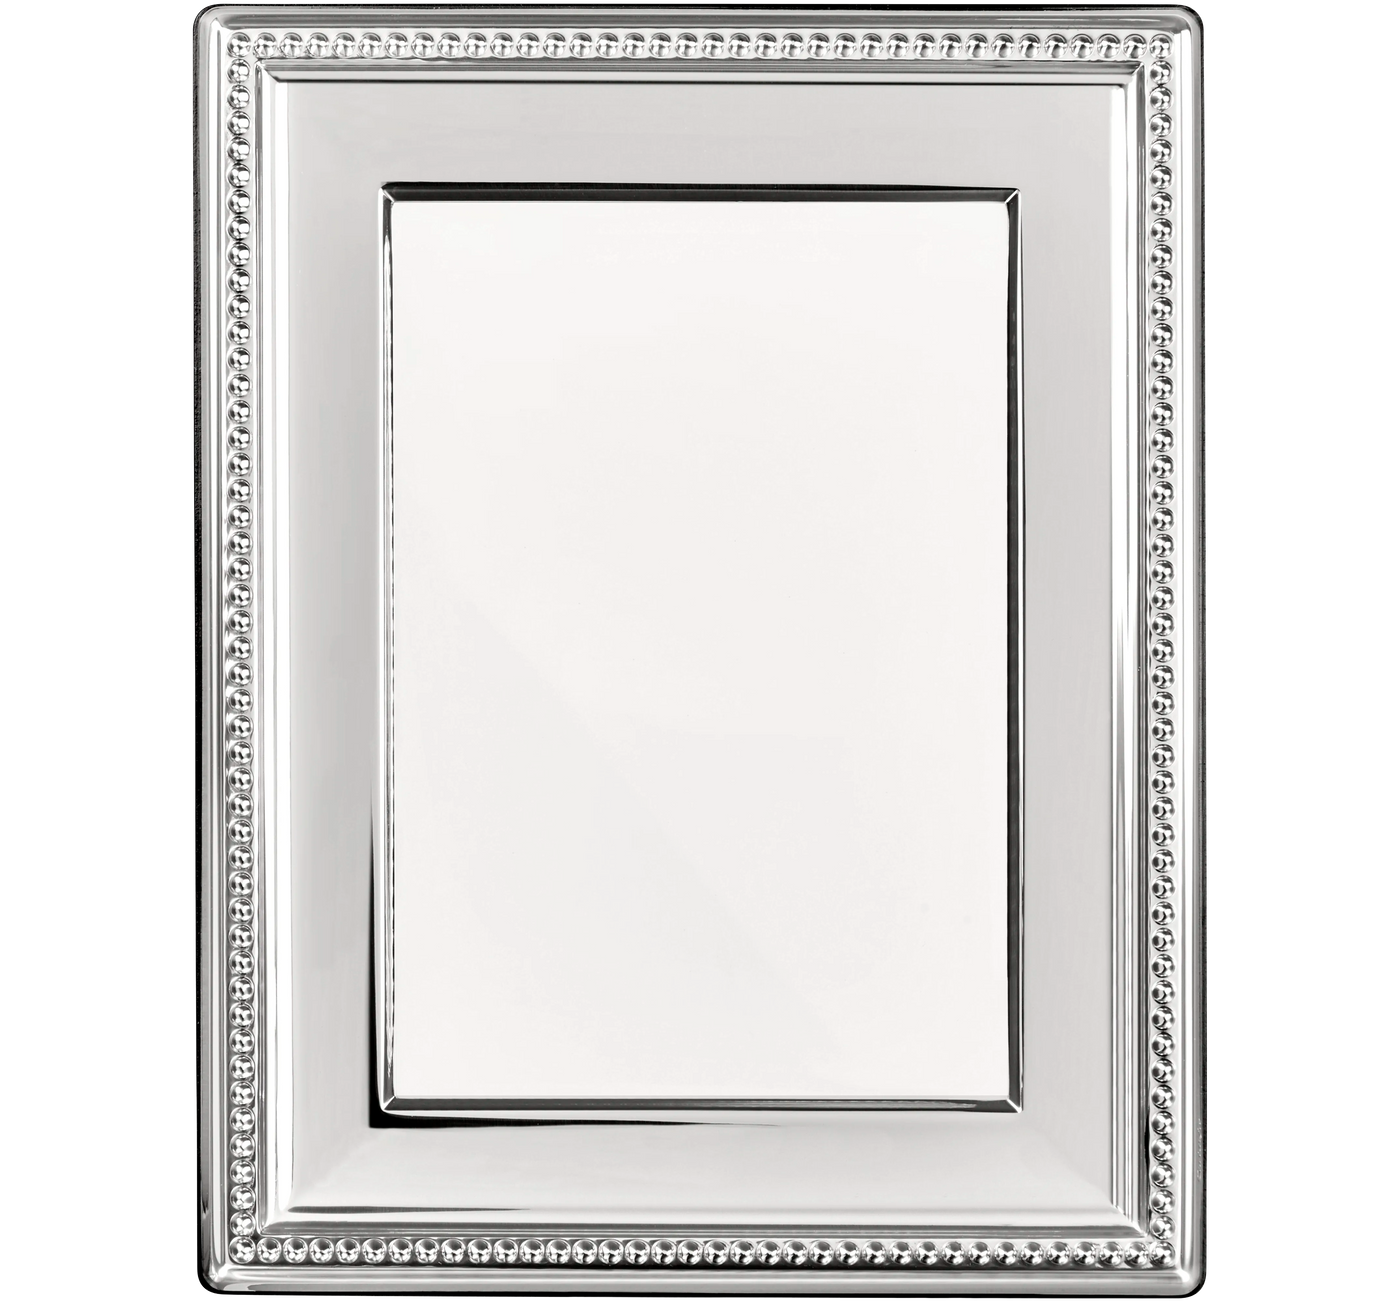 CHRISTOFLE FRAME SILVER-PLATED PERLES (Available in 3 Sizes)